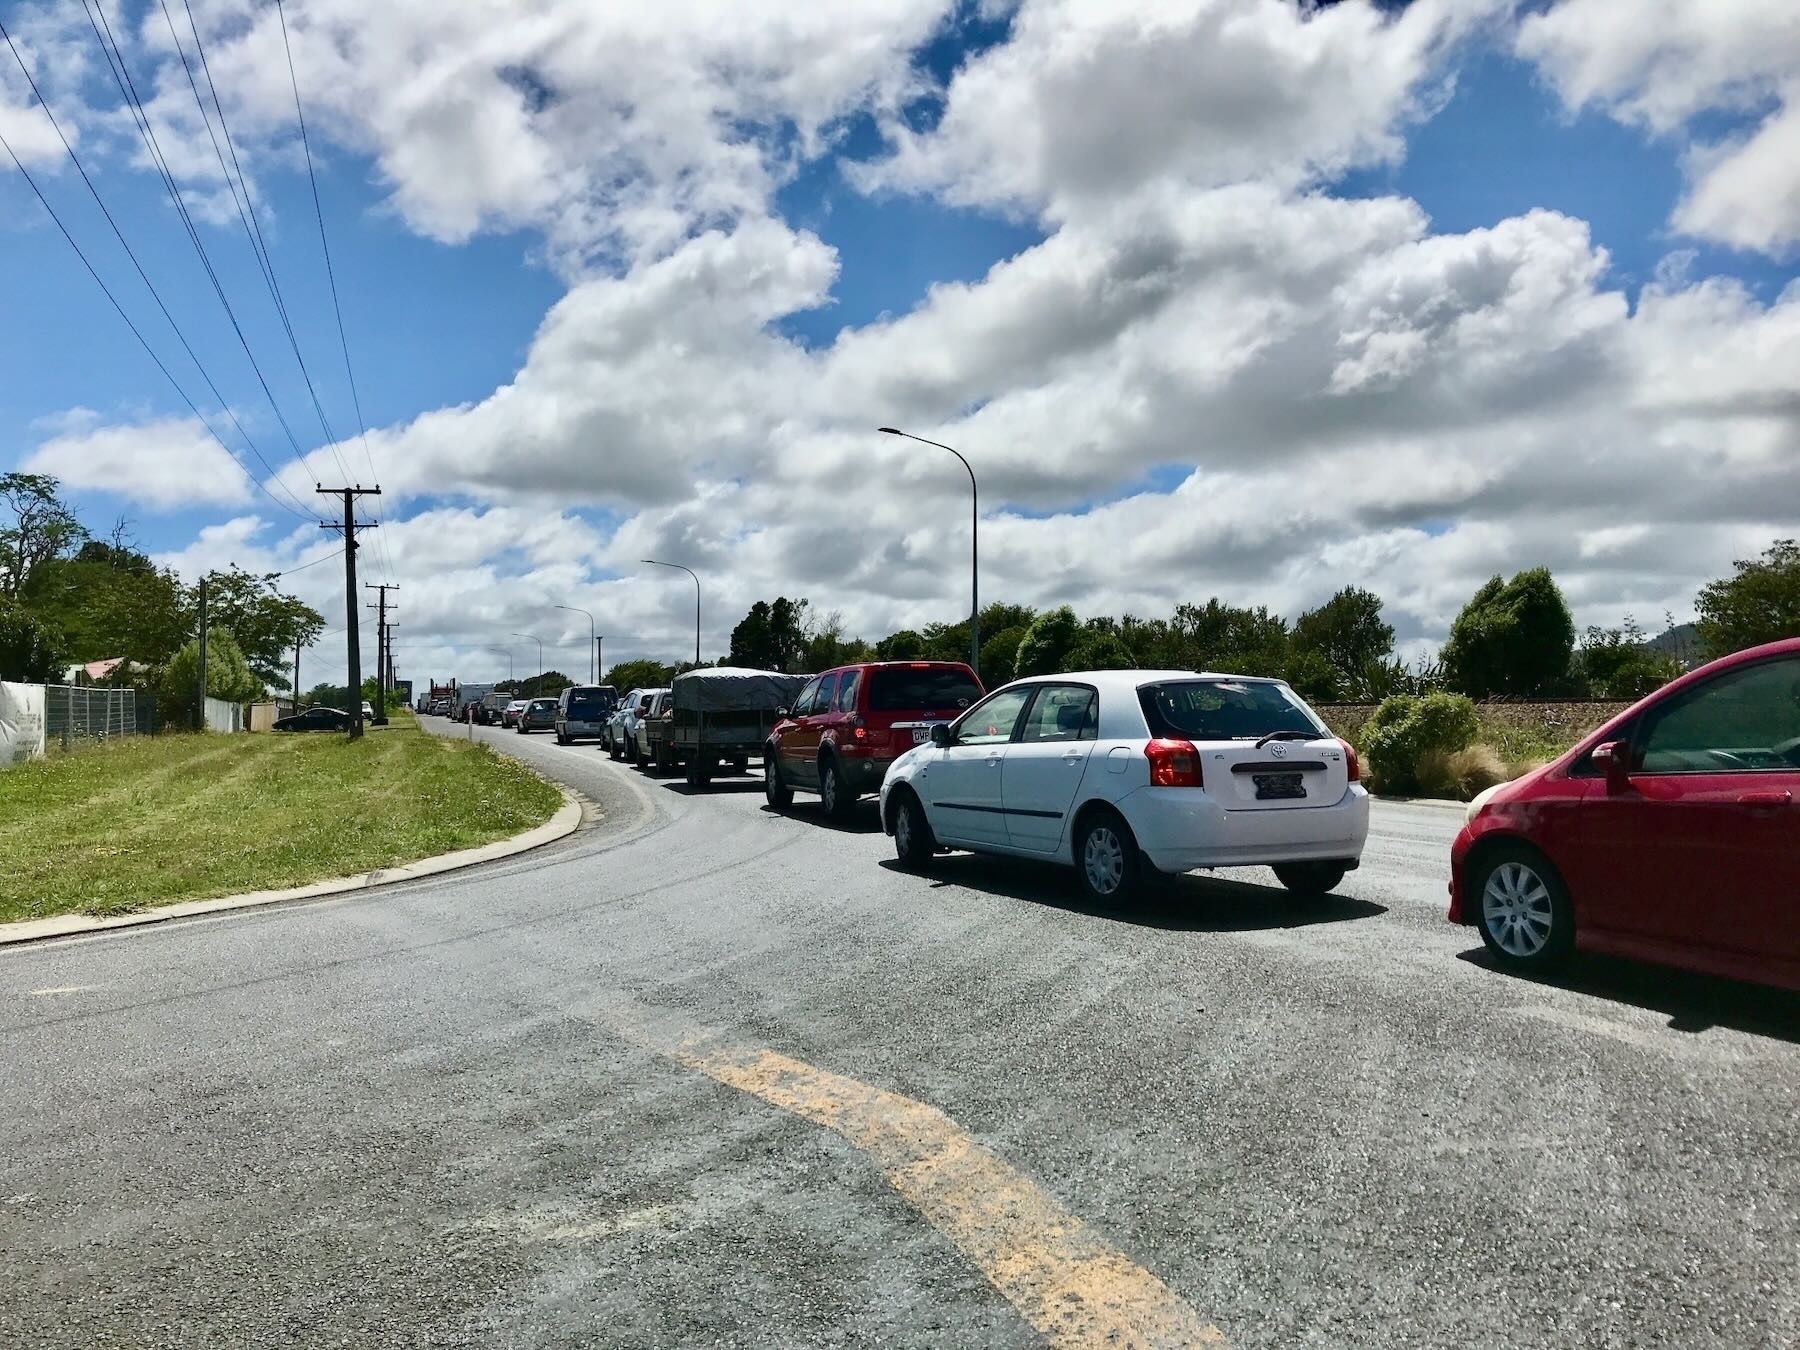 Cars stopped across an intersection. 
Traffic jam at the intersection, SH1 and Waikawa Beach Road, 05 February 2018. 